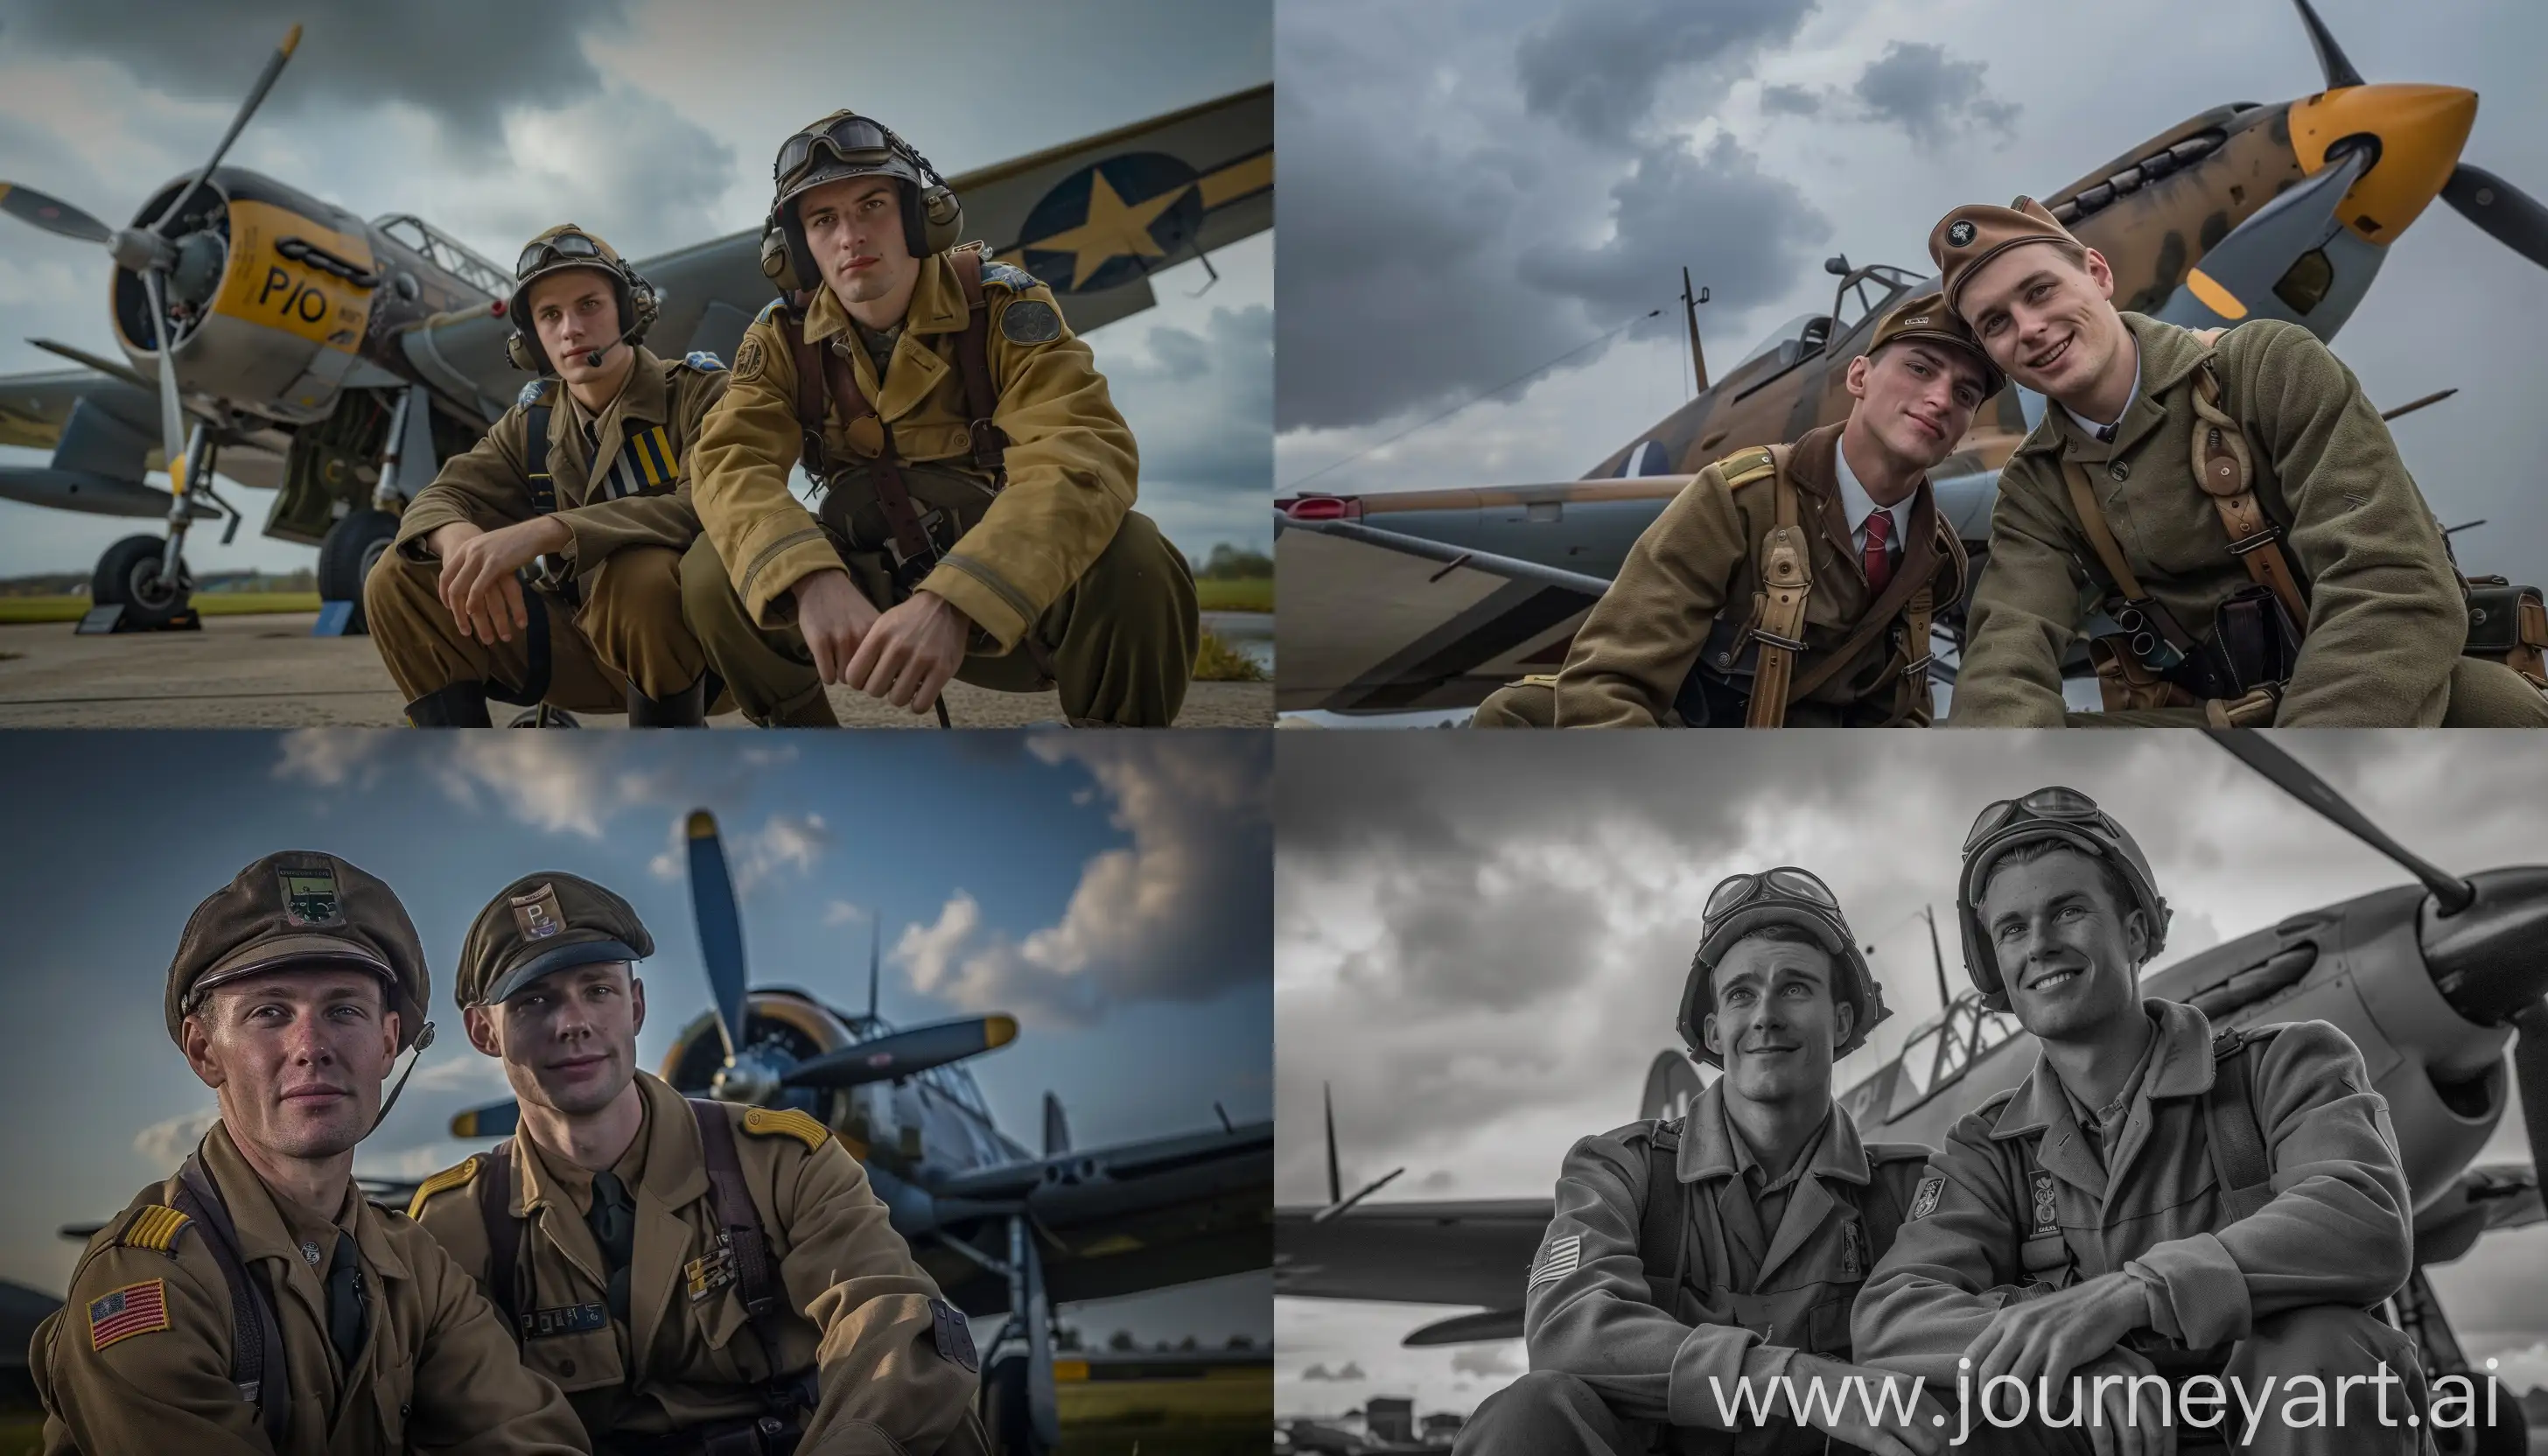 WWII-Pilots-Posing-with-P90-Bomber-Plane